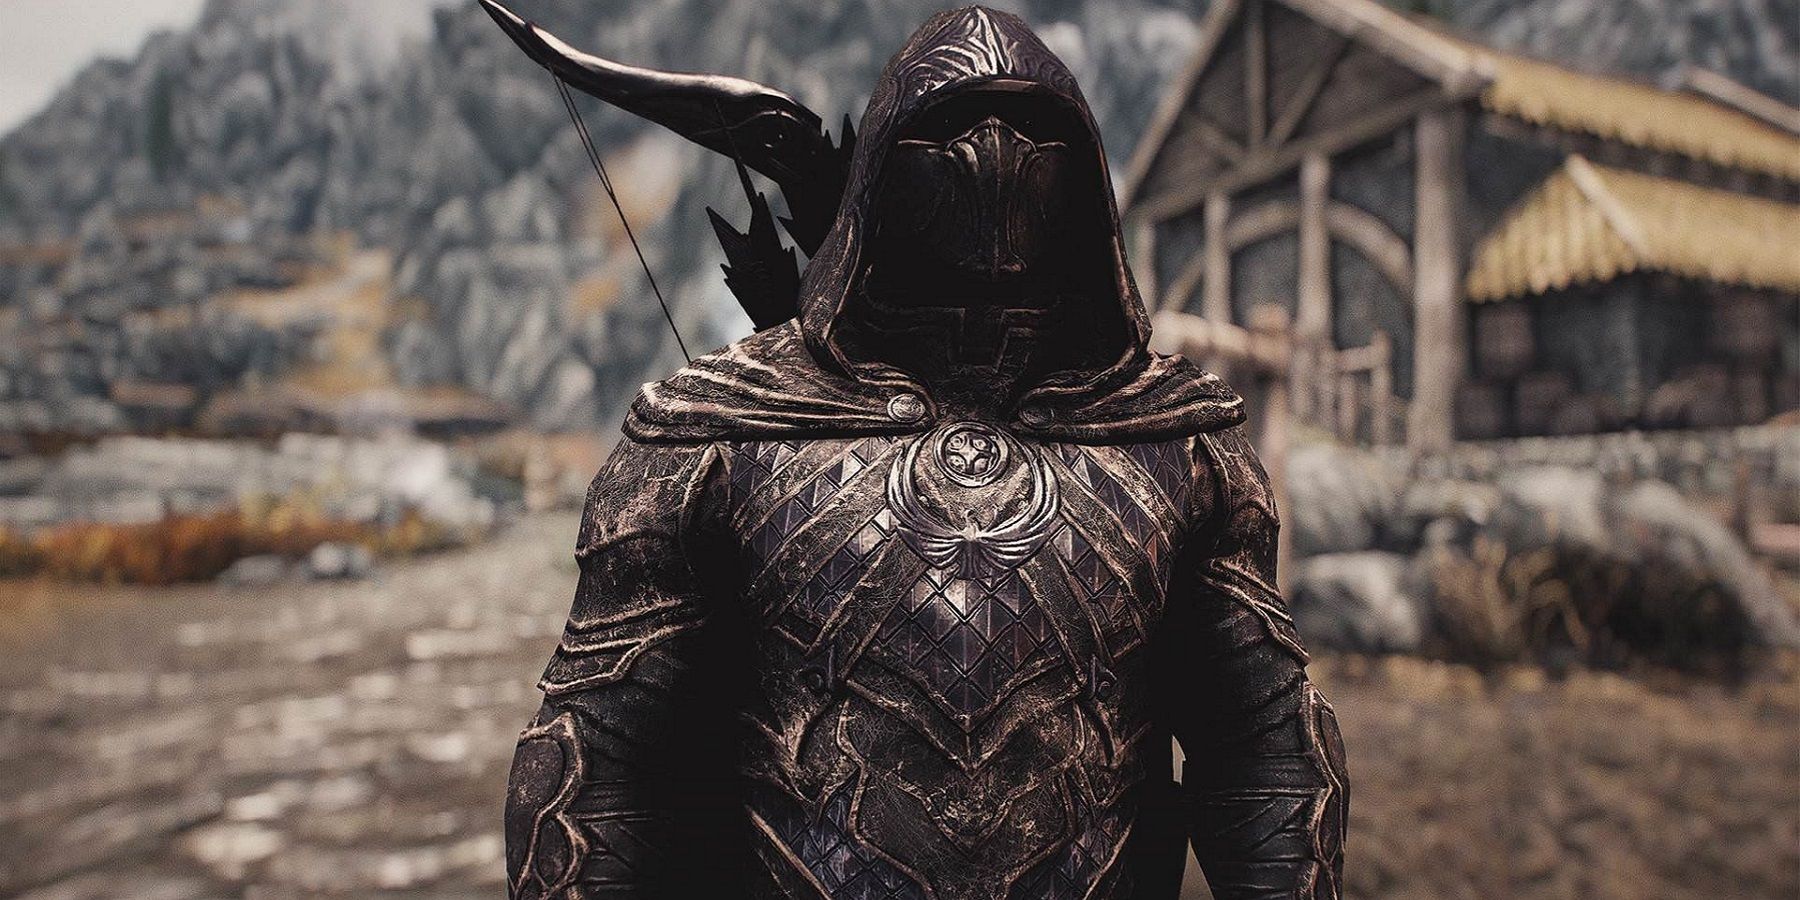 Image from Skyrim showing a Nightingale from the Thieves Guild.